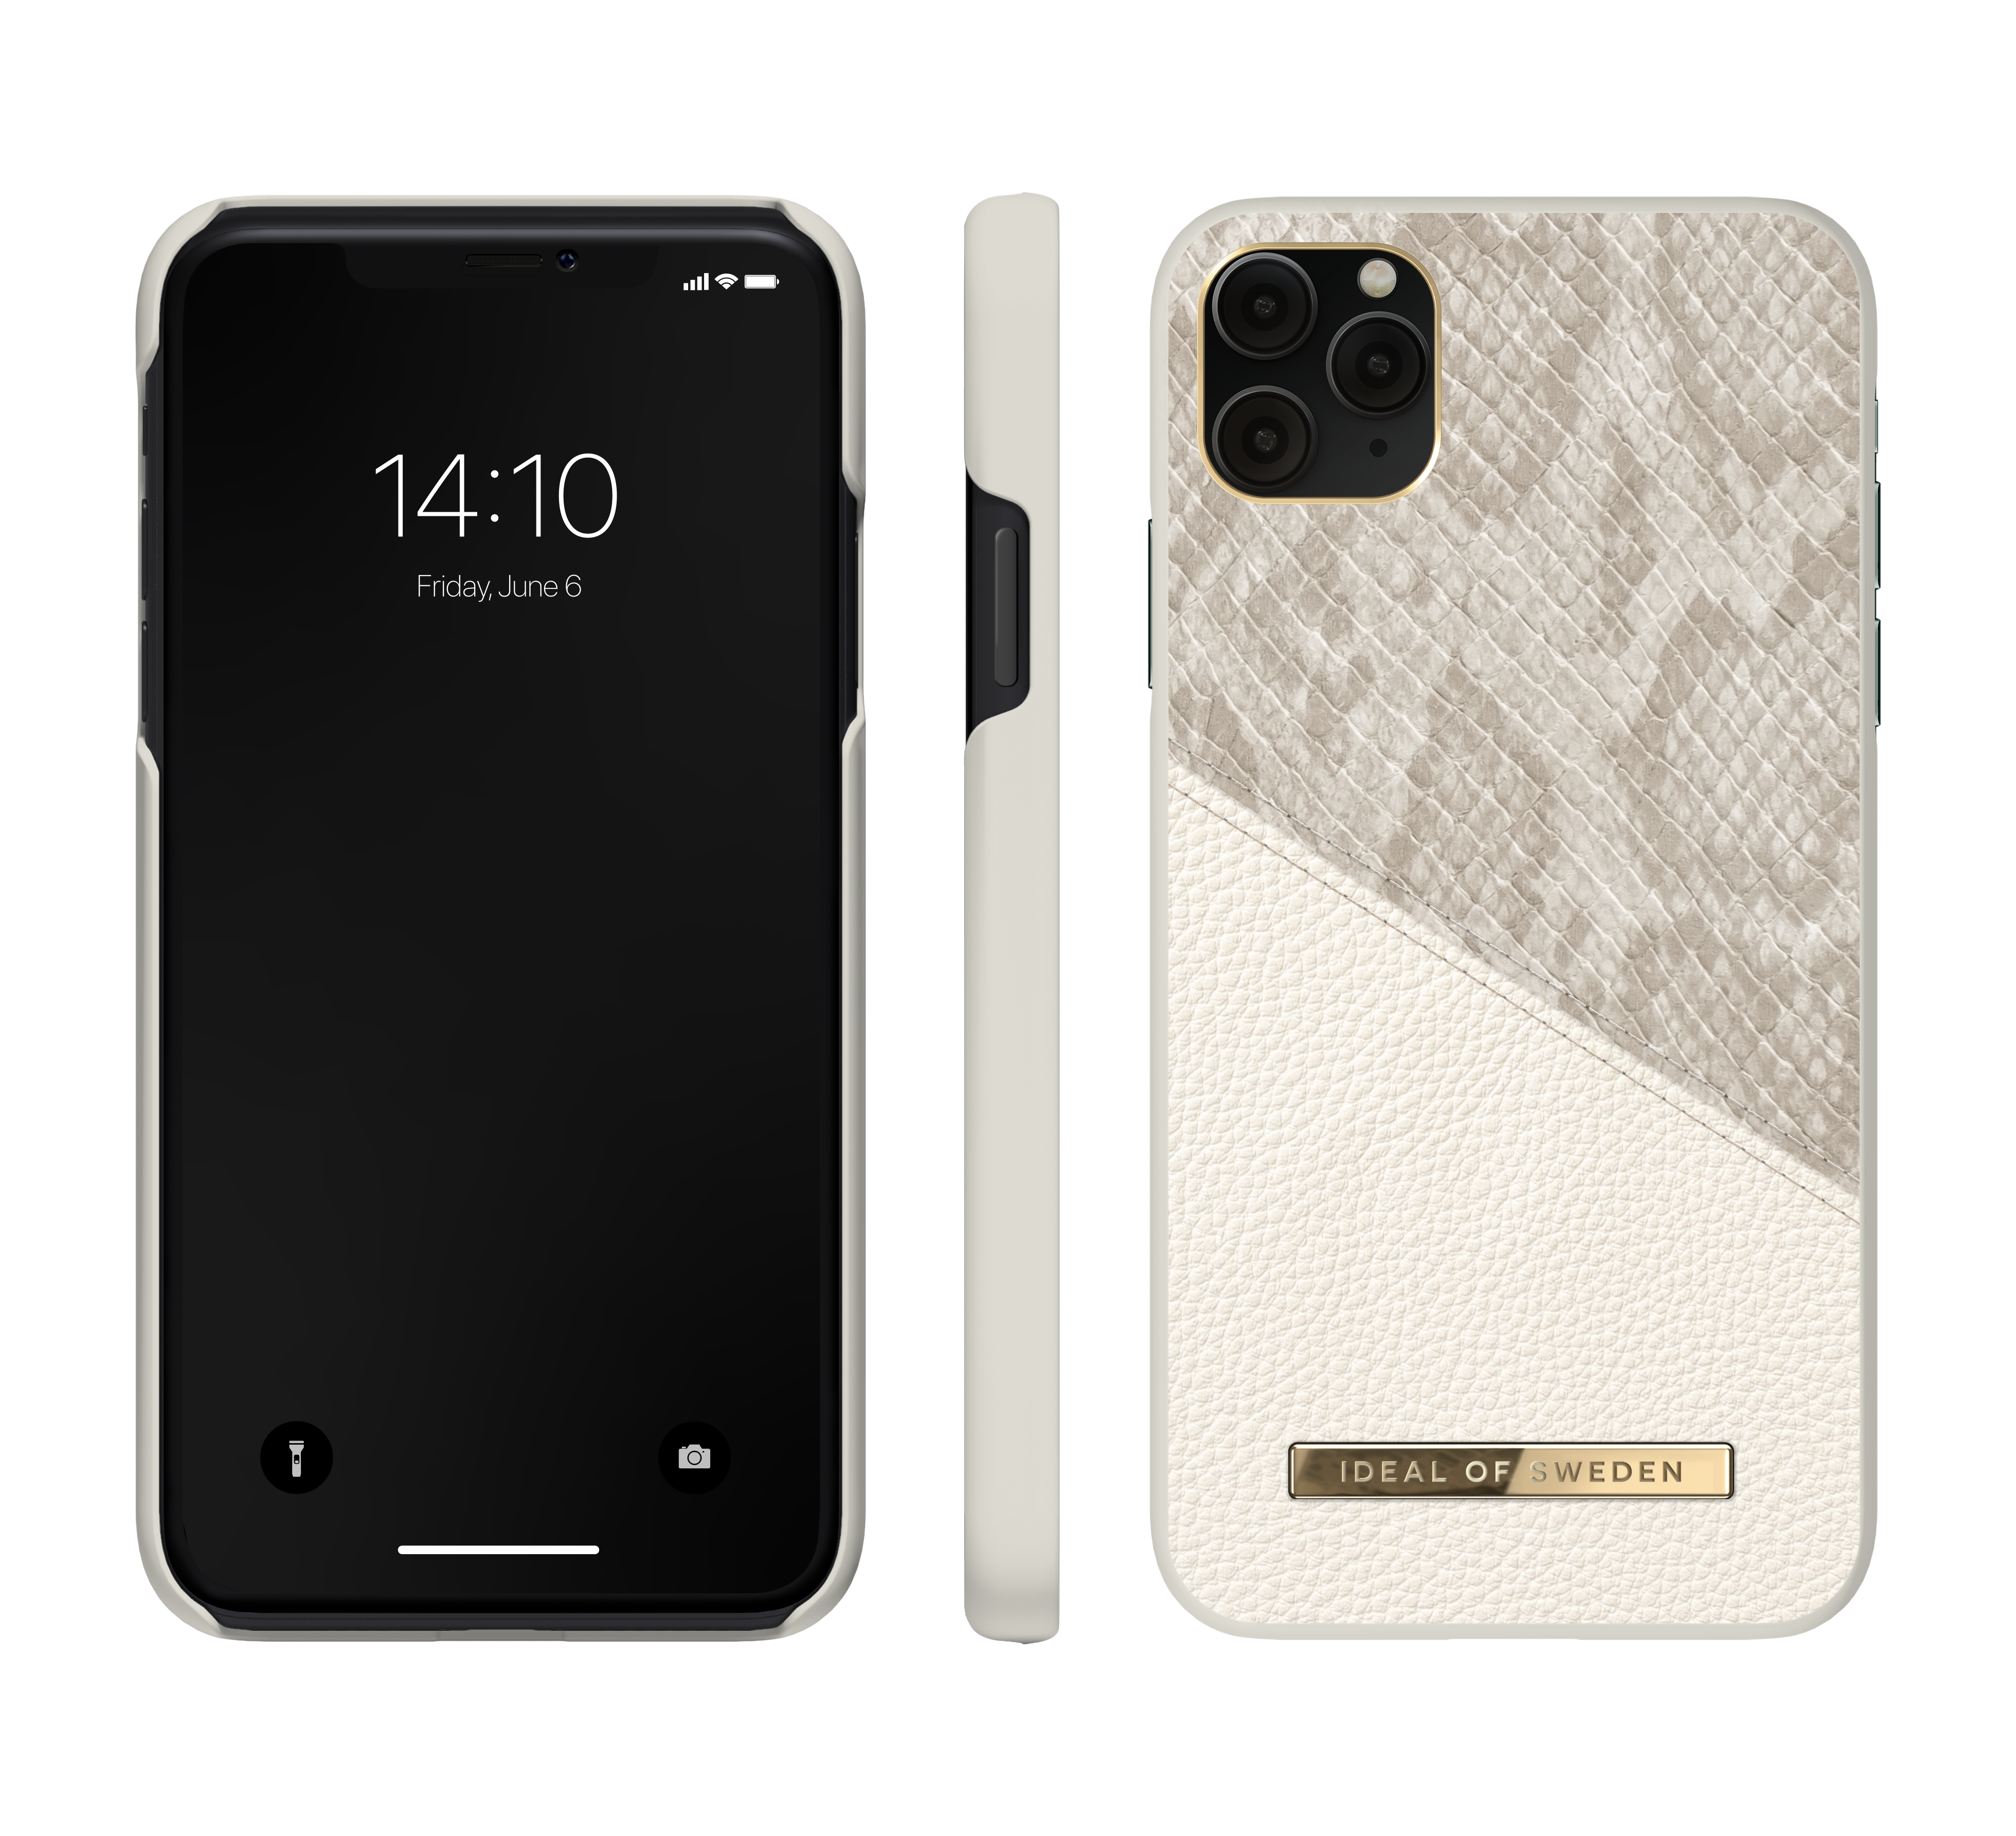 IDEAL OF SWEDEN IDACSS20-I1961-200, 11, iPhone Pearl Python Backcover, XR, Apple, iPhone